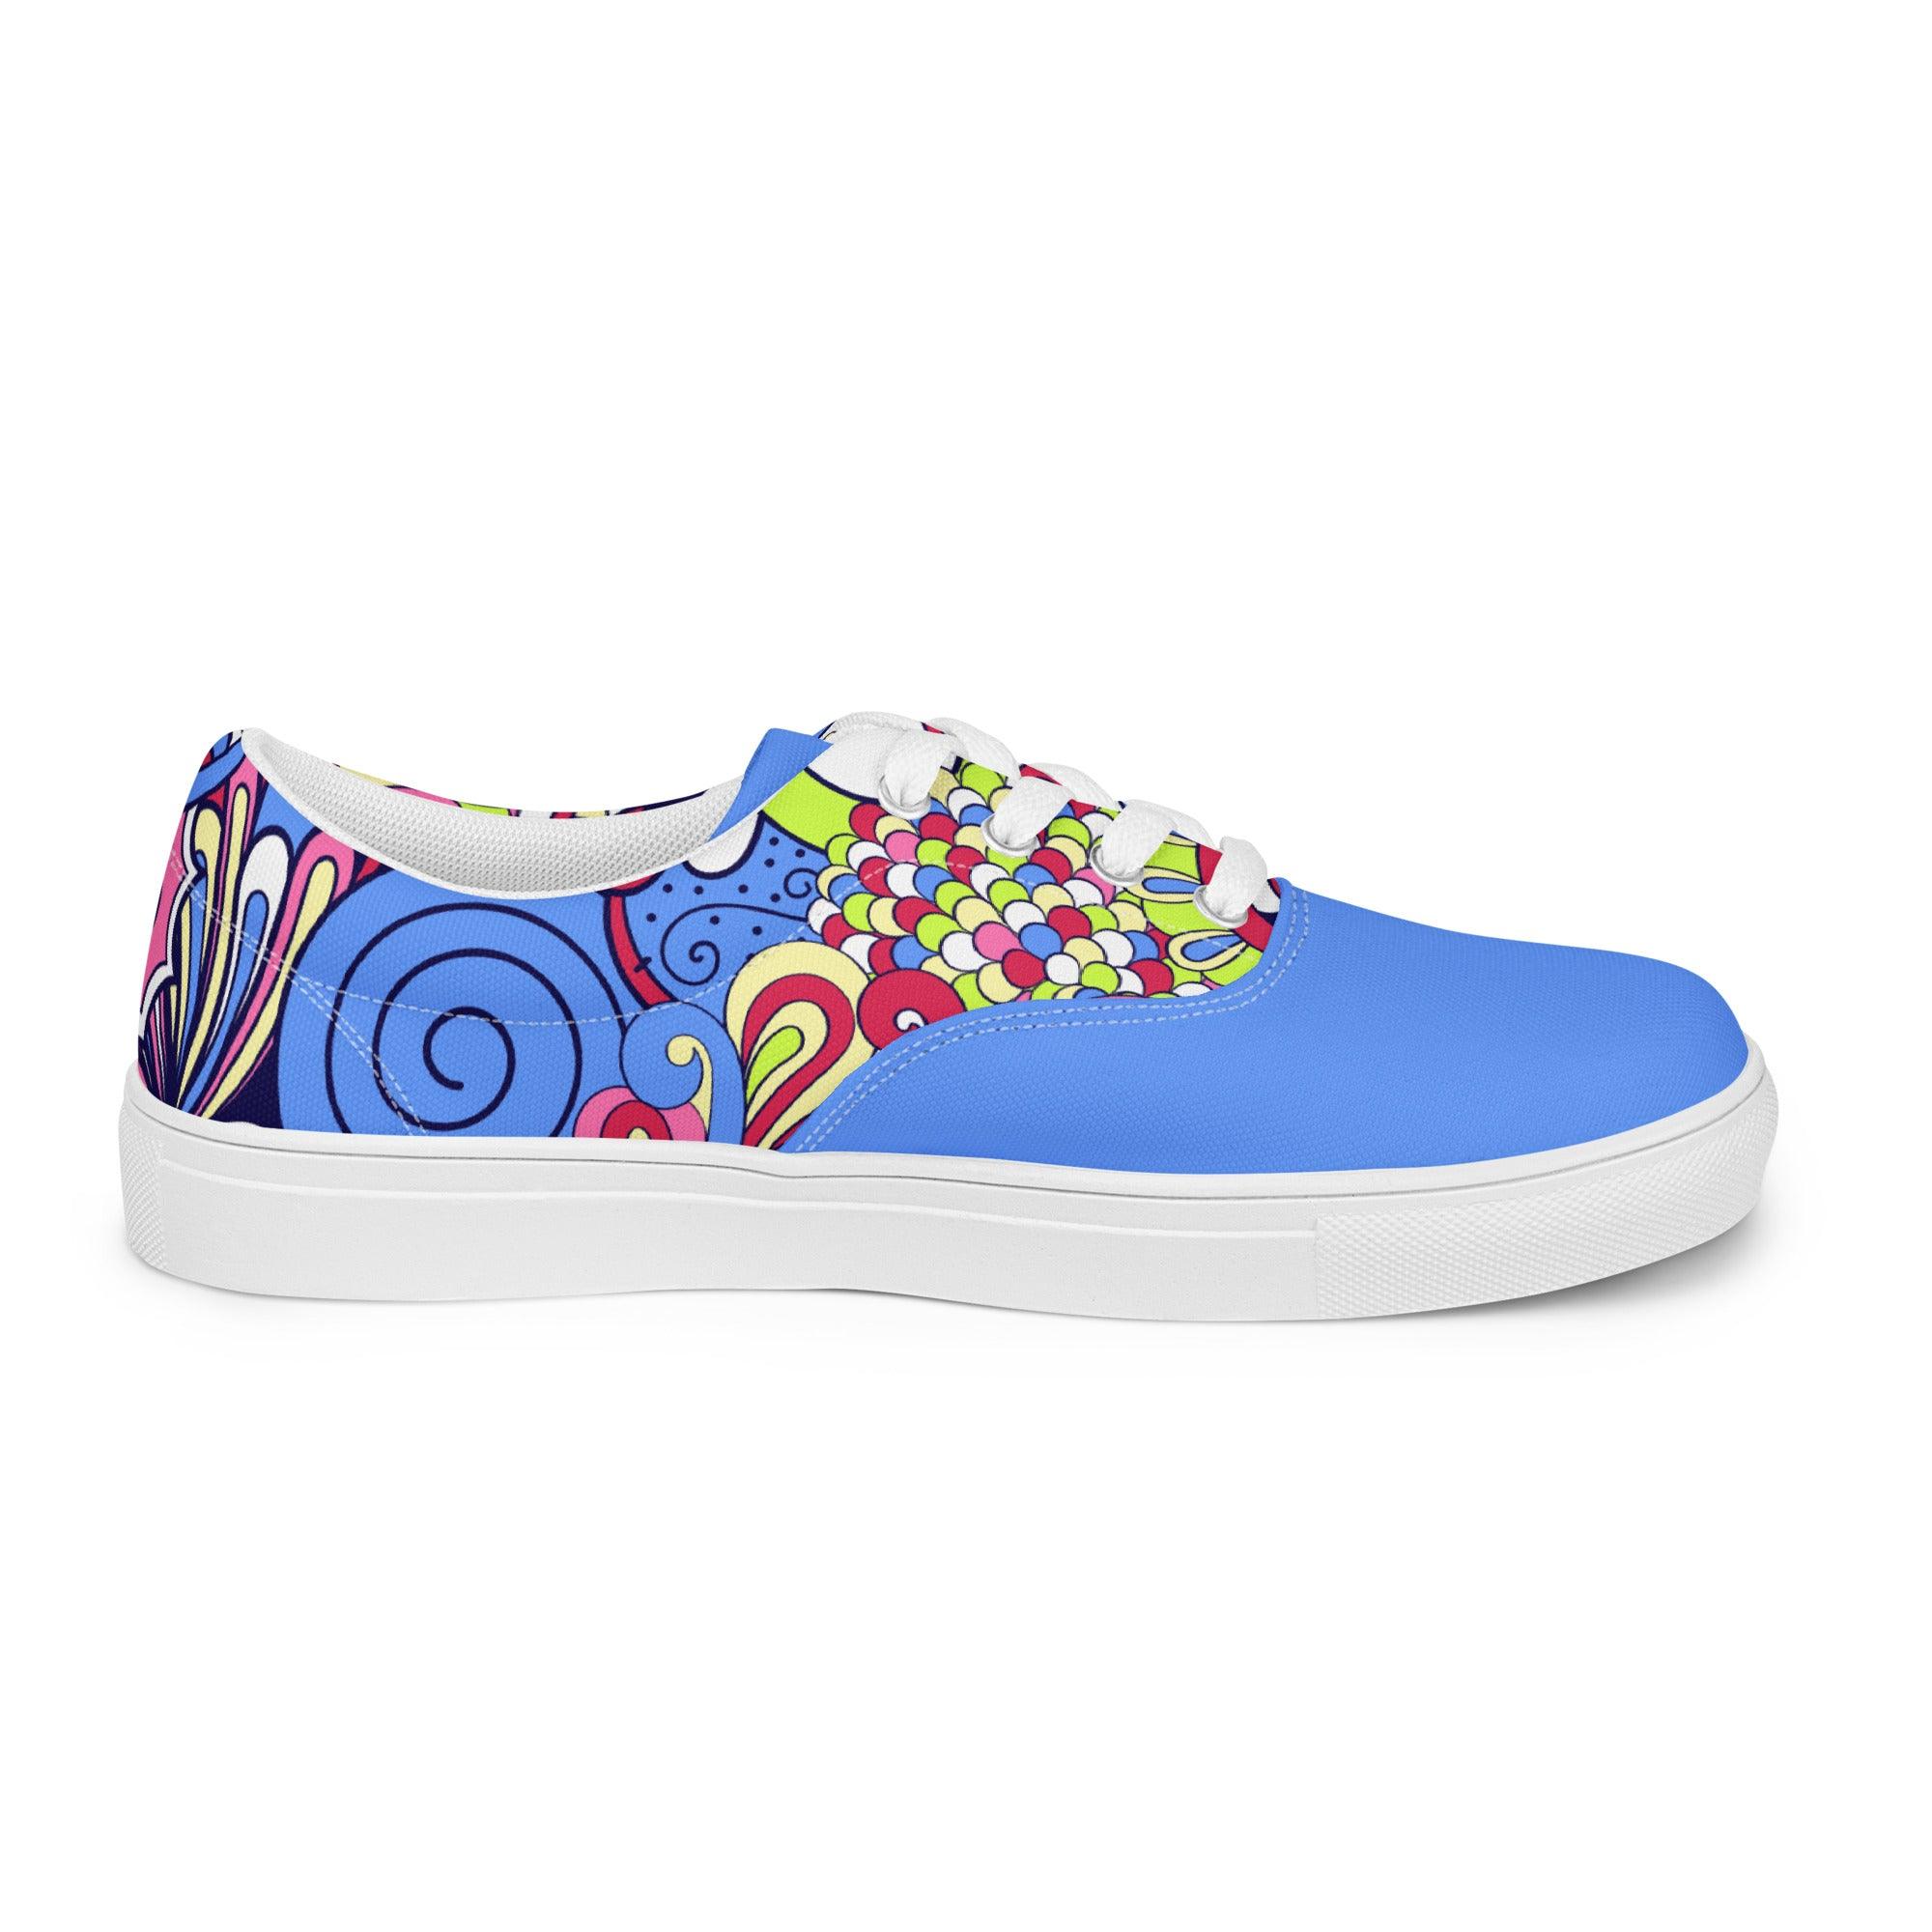 Sechia Pattern Mix Women's Canvas Sneakers - Abstract Paisley Solid Retro Chic Bold Vibrant Casual Hip Funky Psychedelic Flower Power Blue Pink